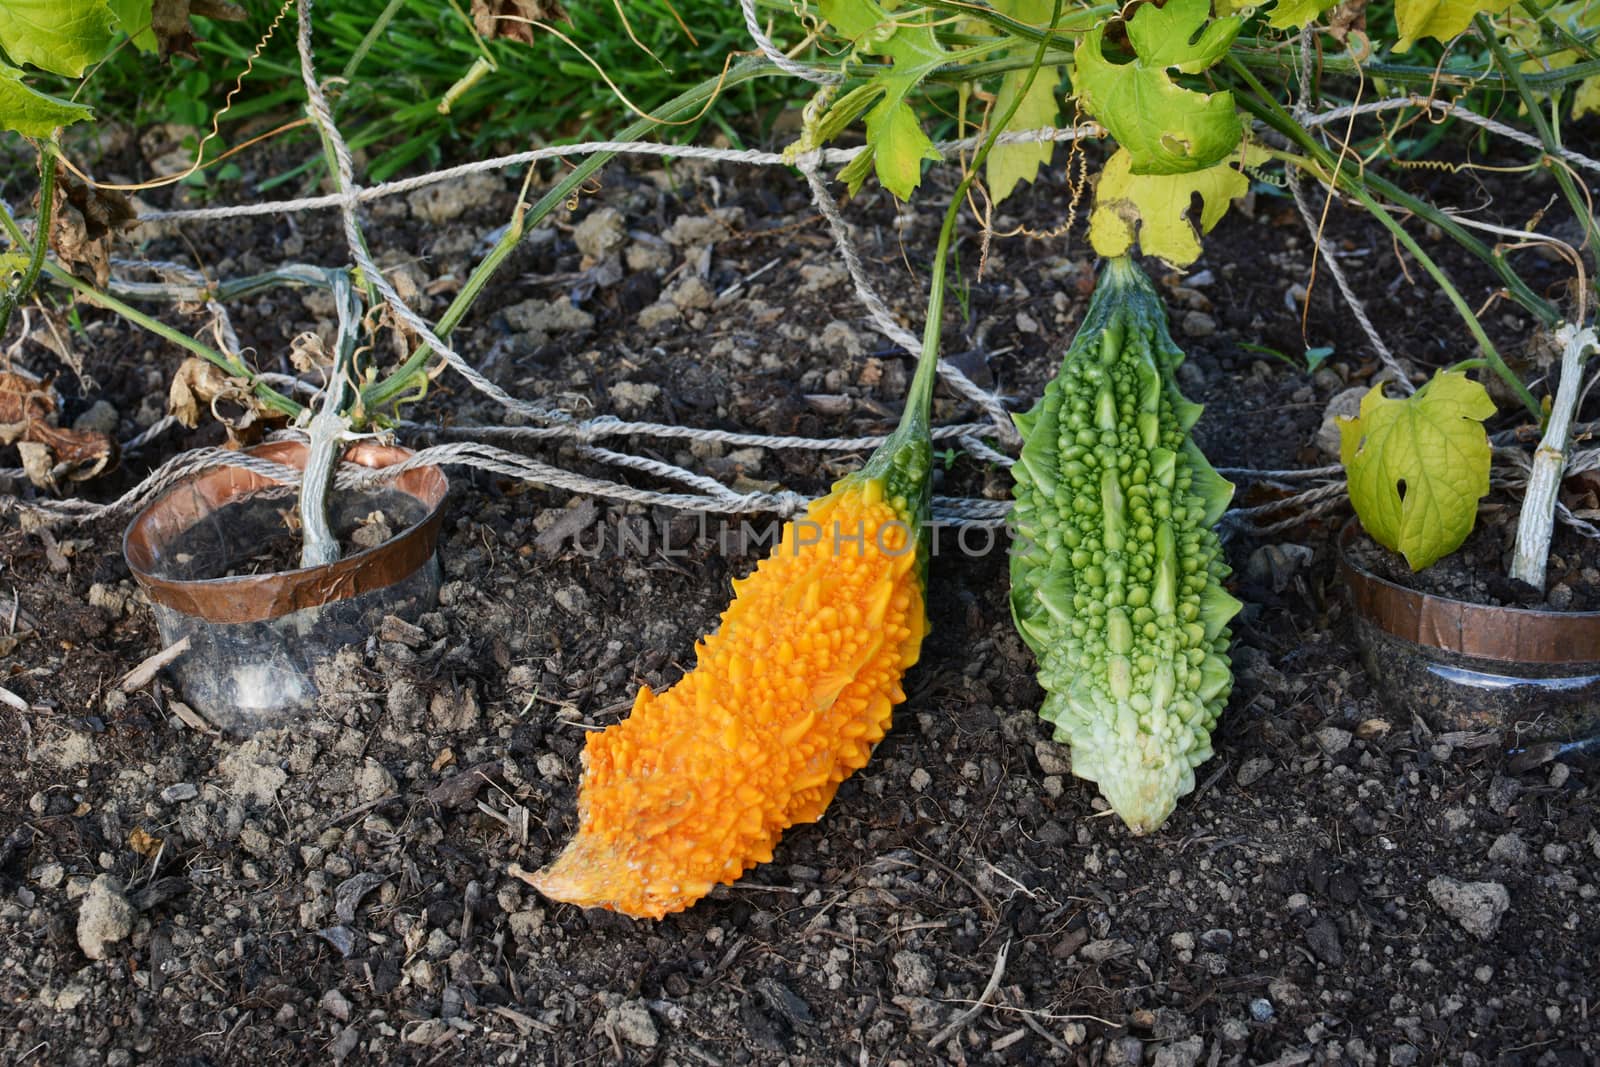 Ripe bitter melon growing next to green immature gourd in a vegetable garden